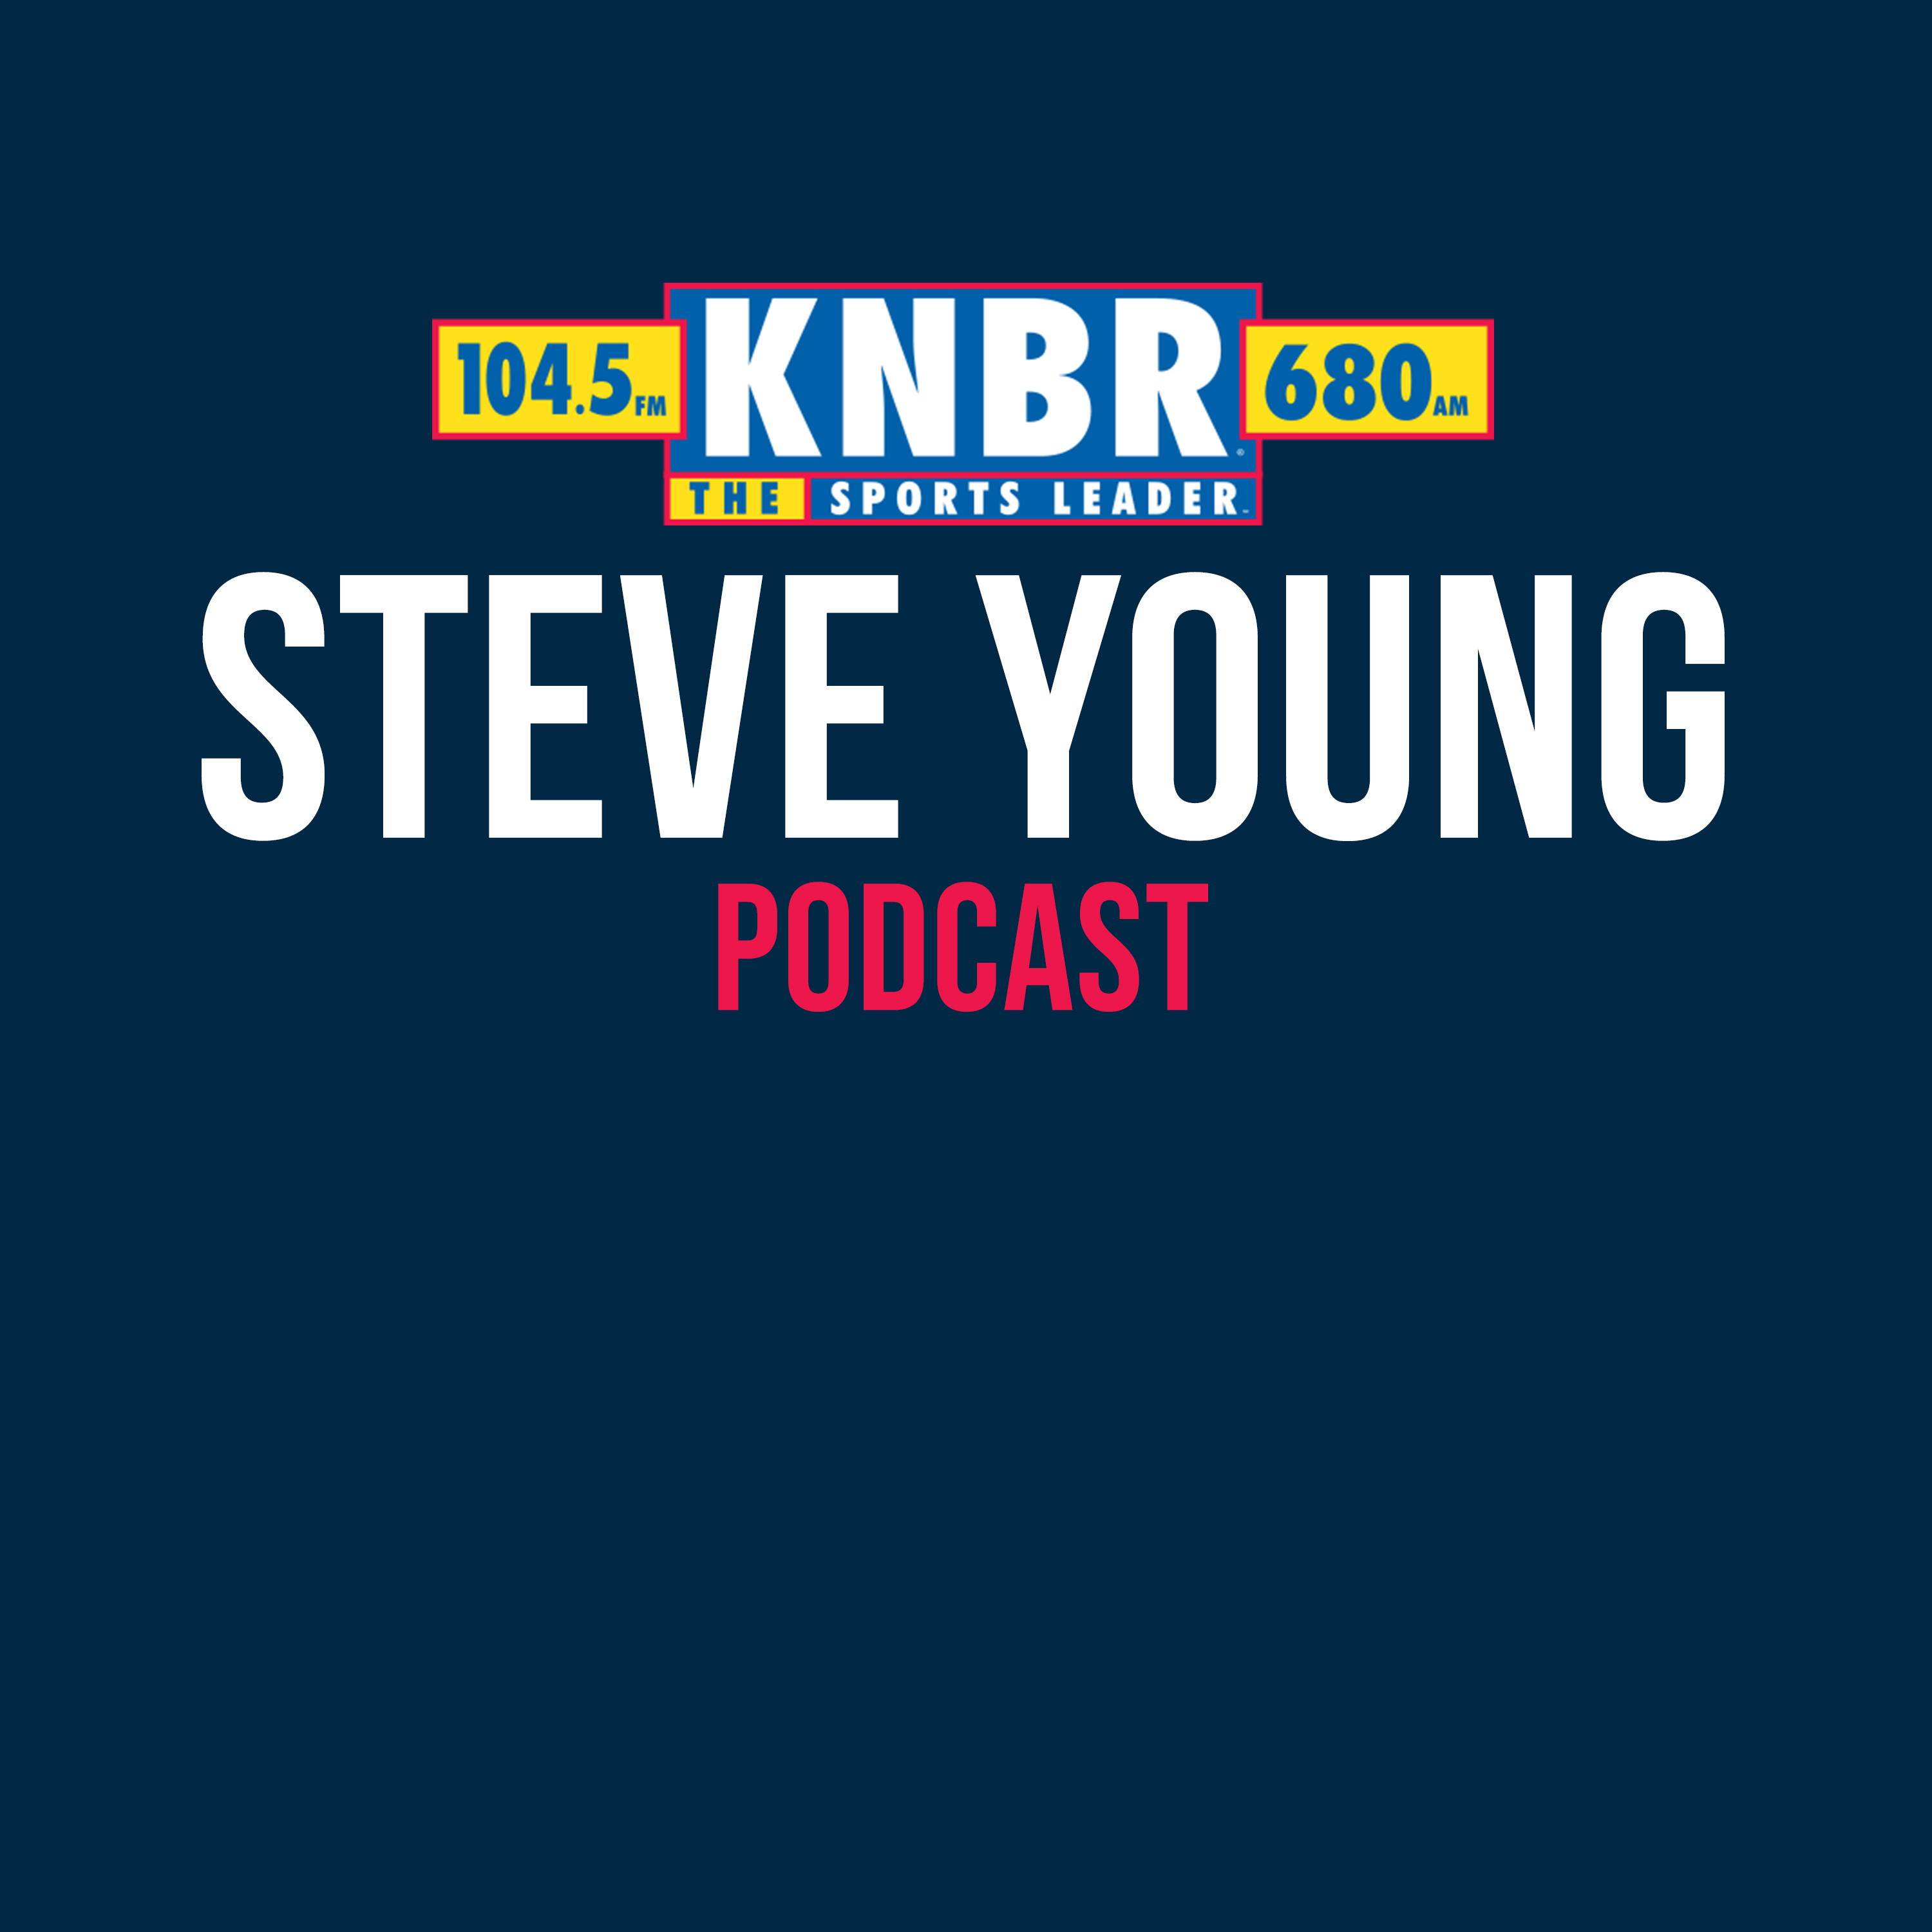 11-3 Steve Young joins TKB to discuss the 49ers snapping their 4 game losing streak Sunday against the Bears